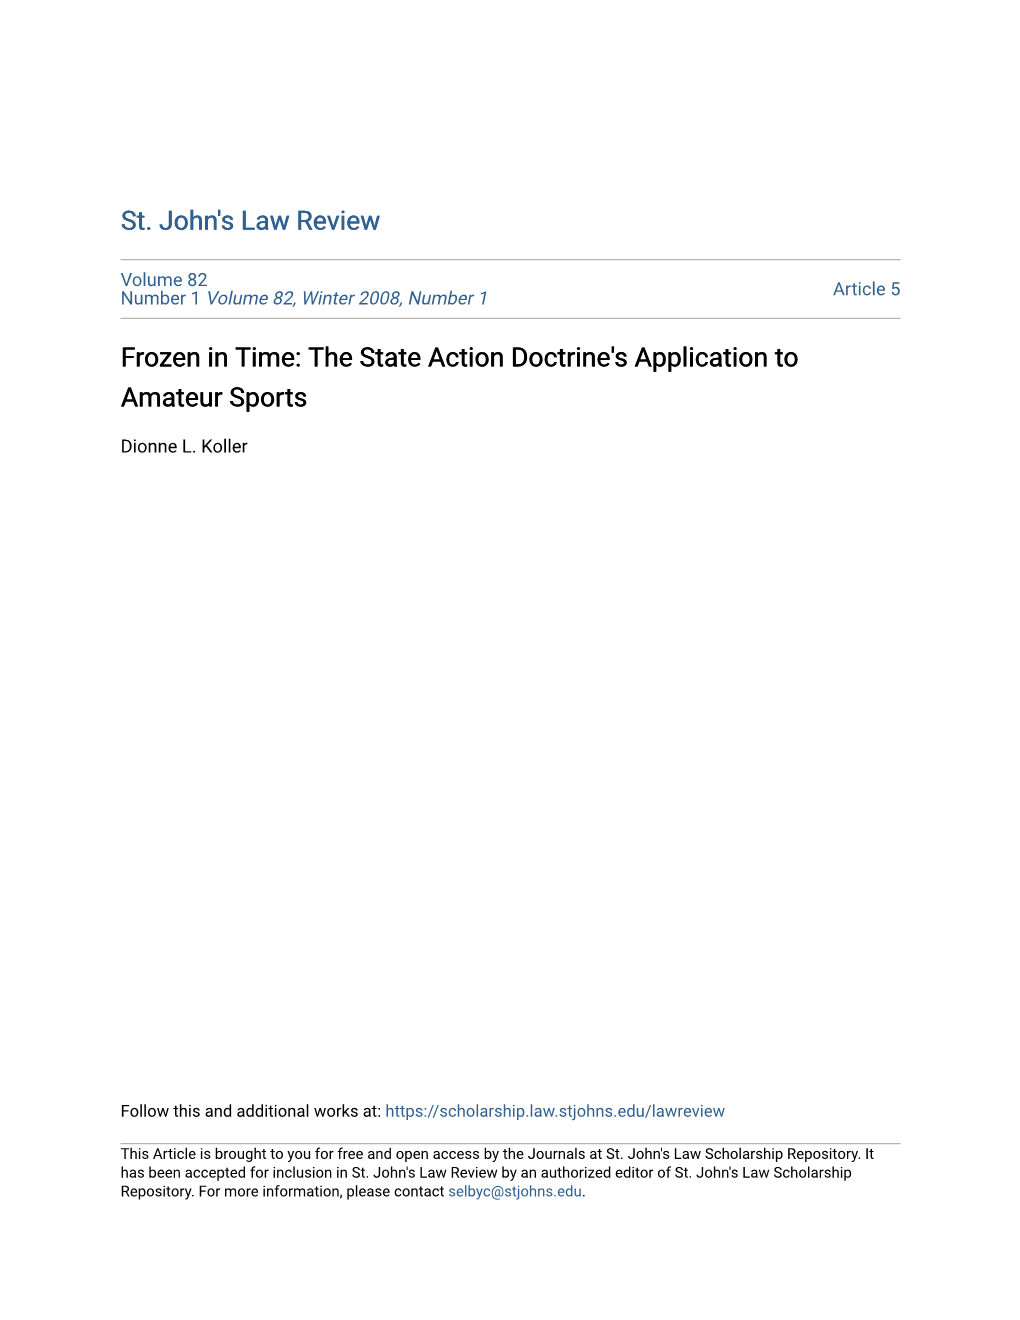 The State Action Doctrine's Application to Amateur Sports